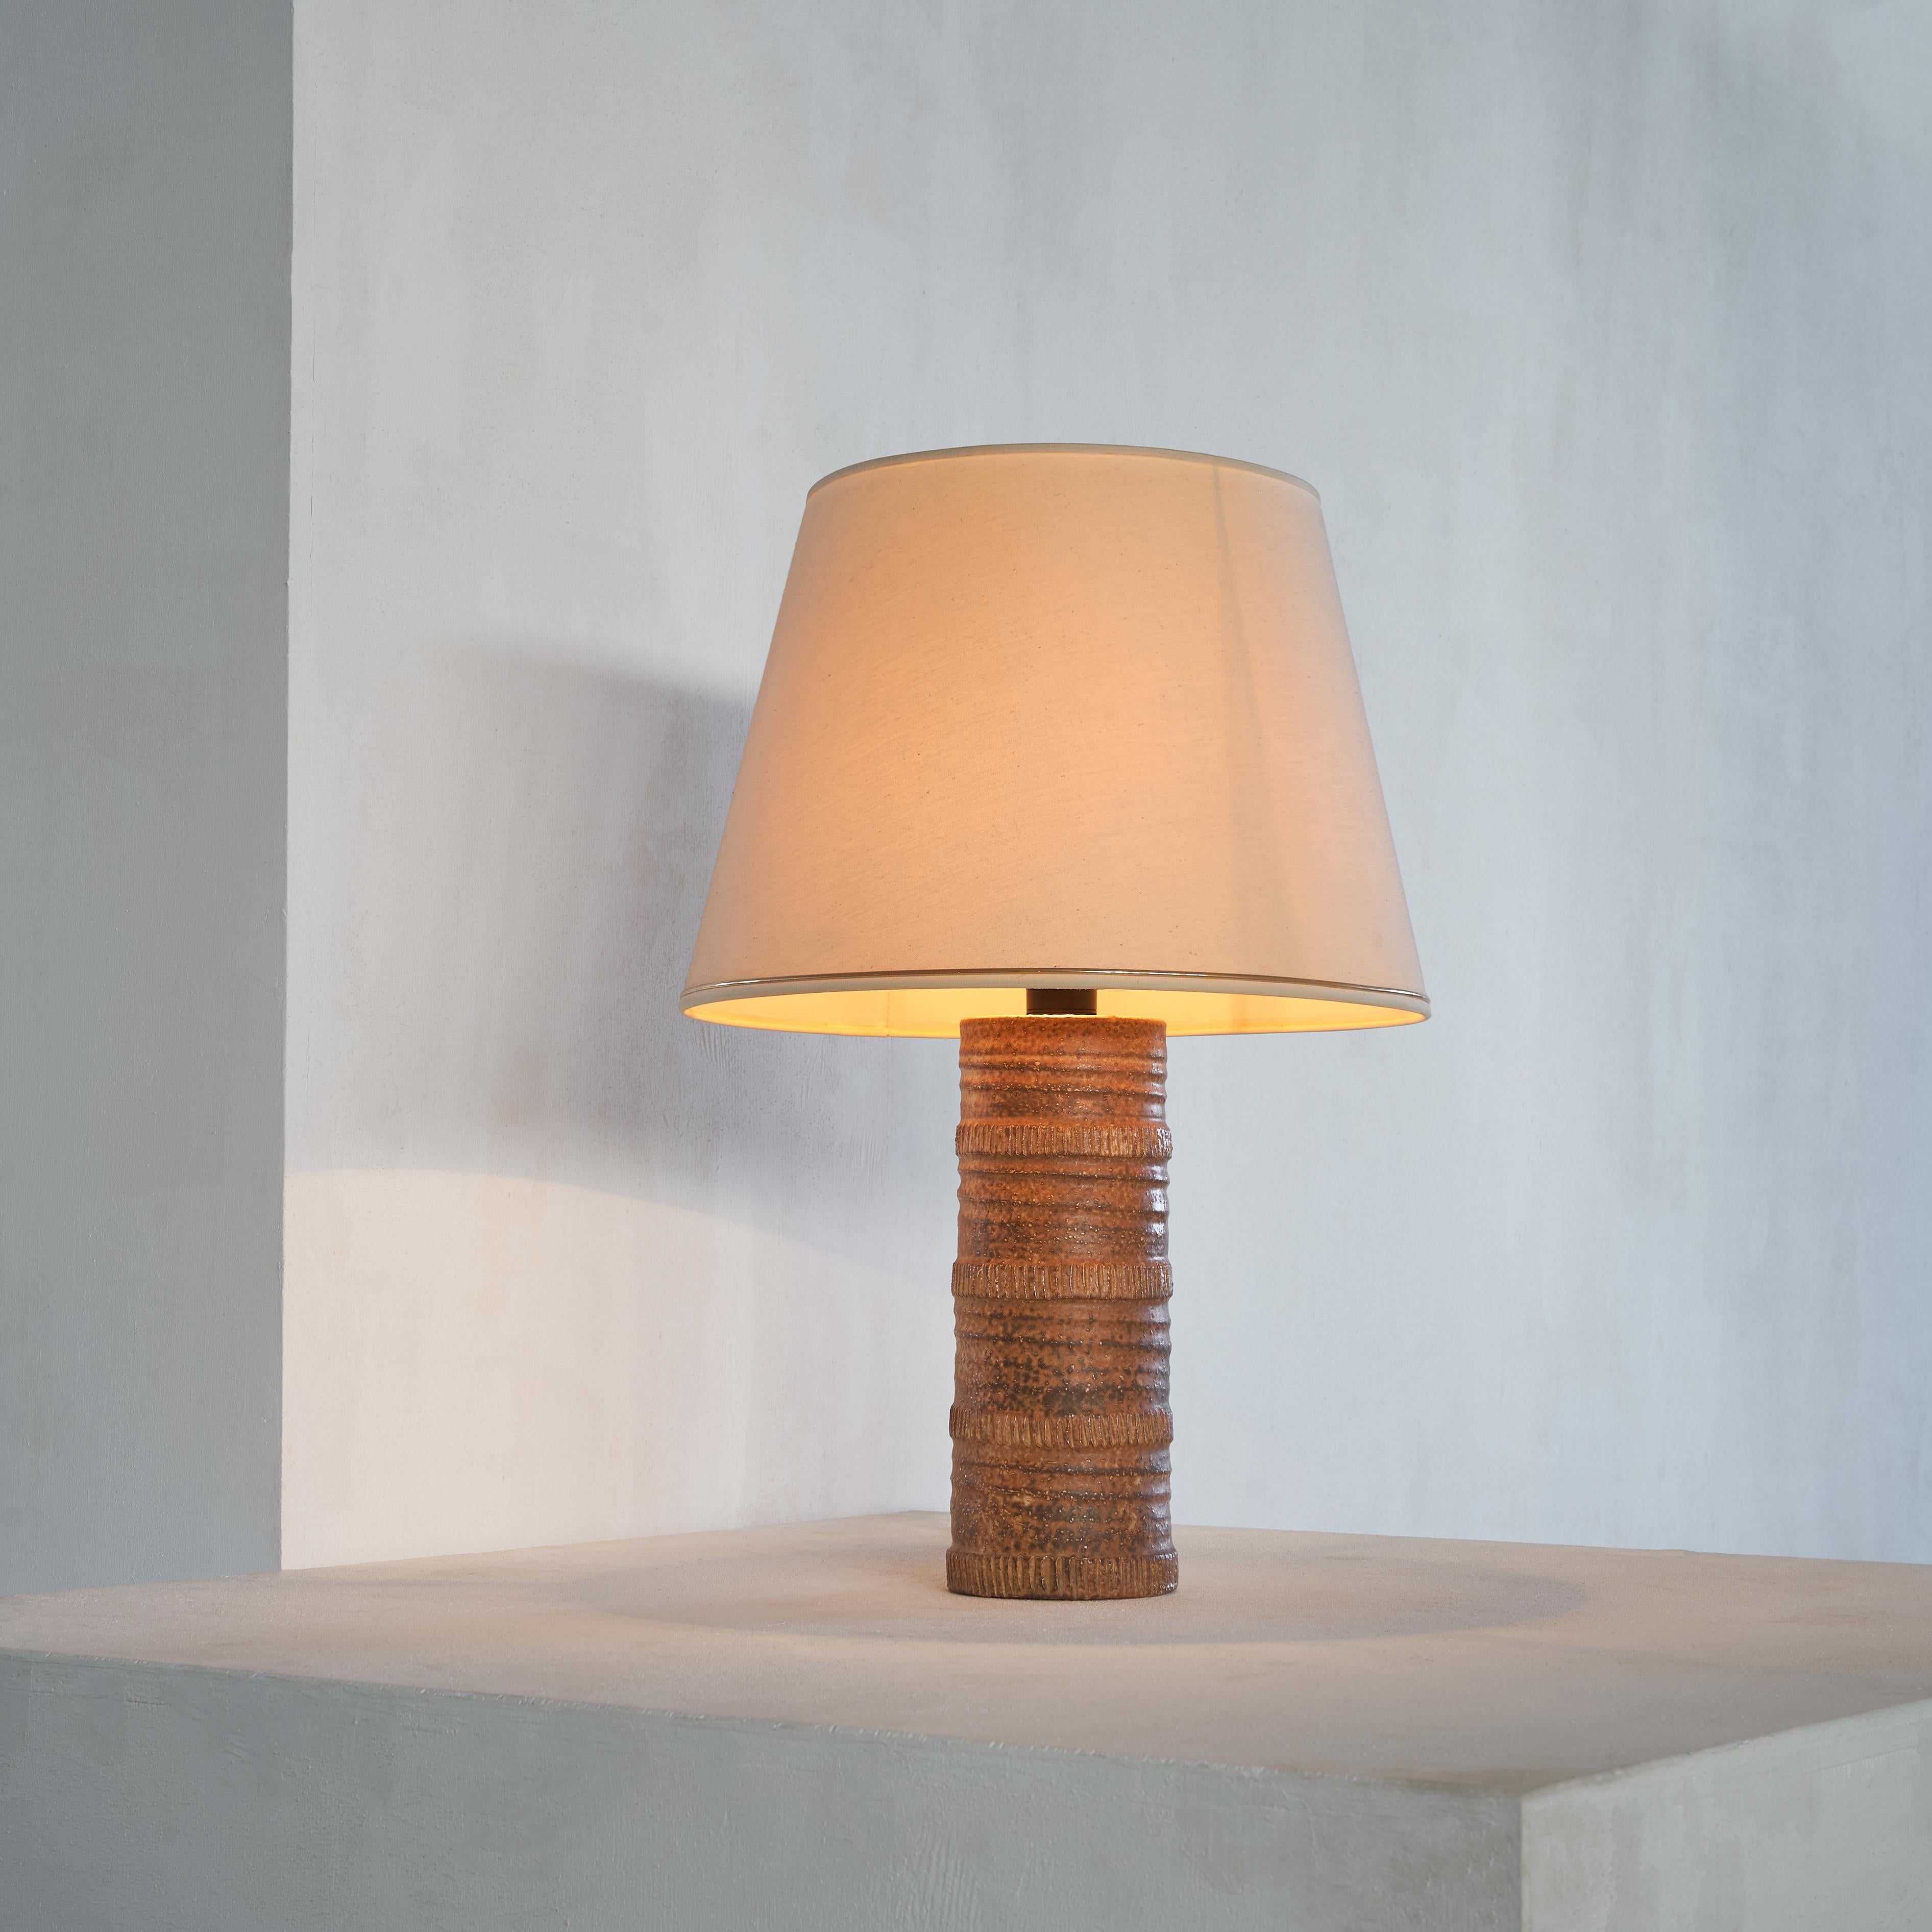 Mid-century pottery table lamp by Mobach, The Netherlands.

Beautiful large pottery table lamp made in the middle of the last century by the Mobach family.

A timeless design that feels very modern due to the rich detailing and tactility. In